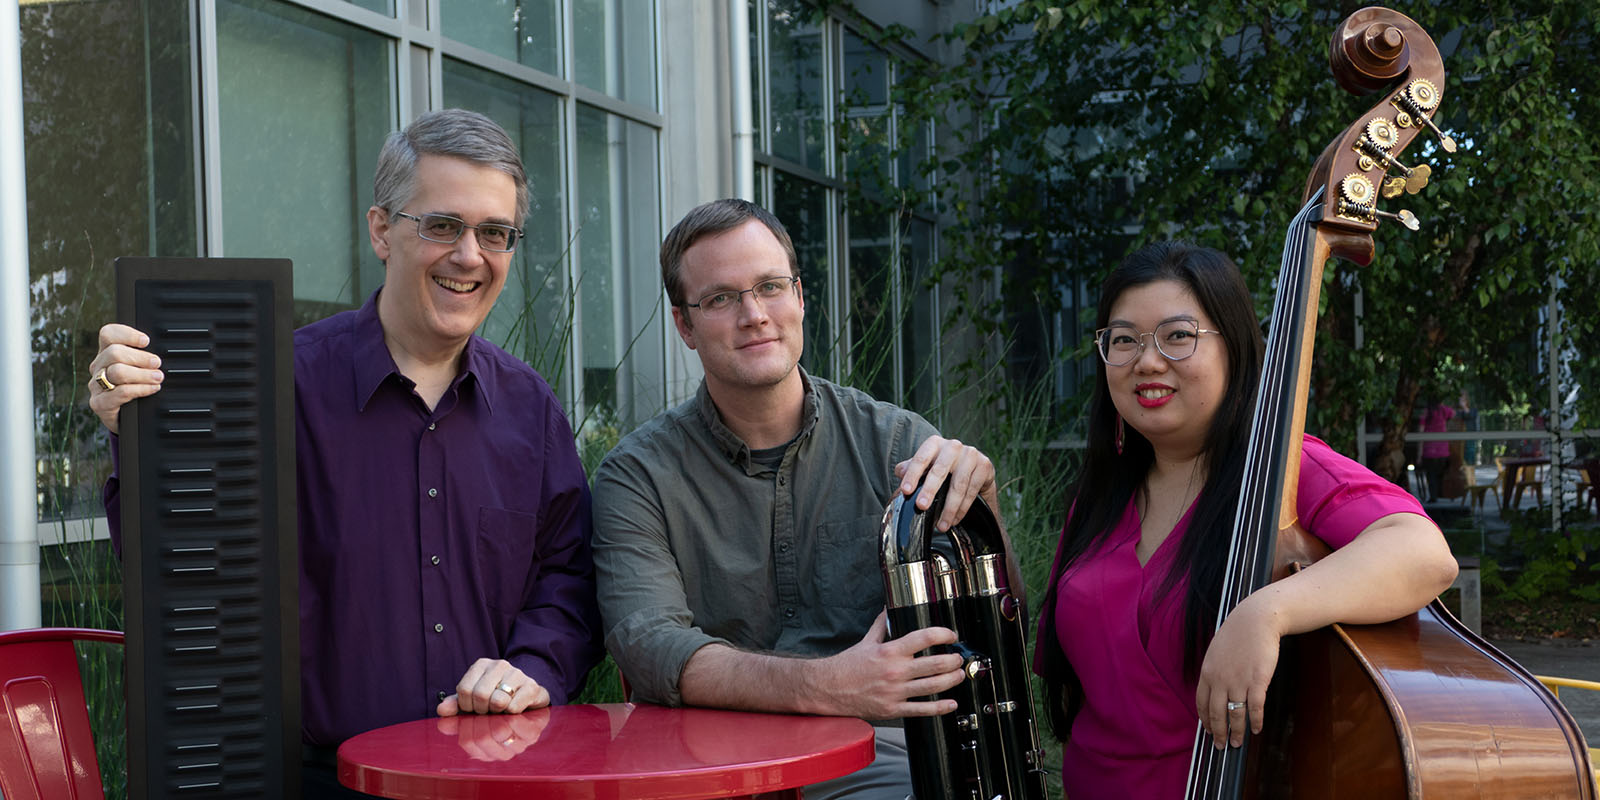 Adrian Childs, Emily Koh, and Peter Van Zandt Lane, Composers